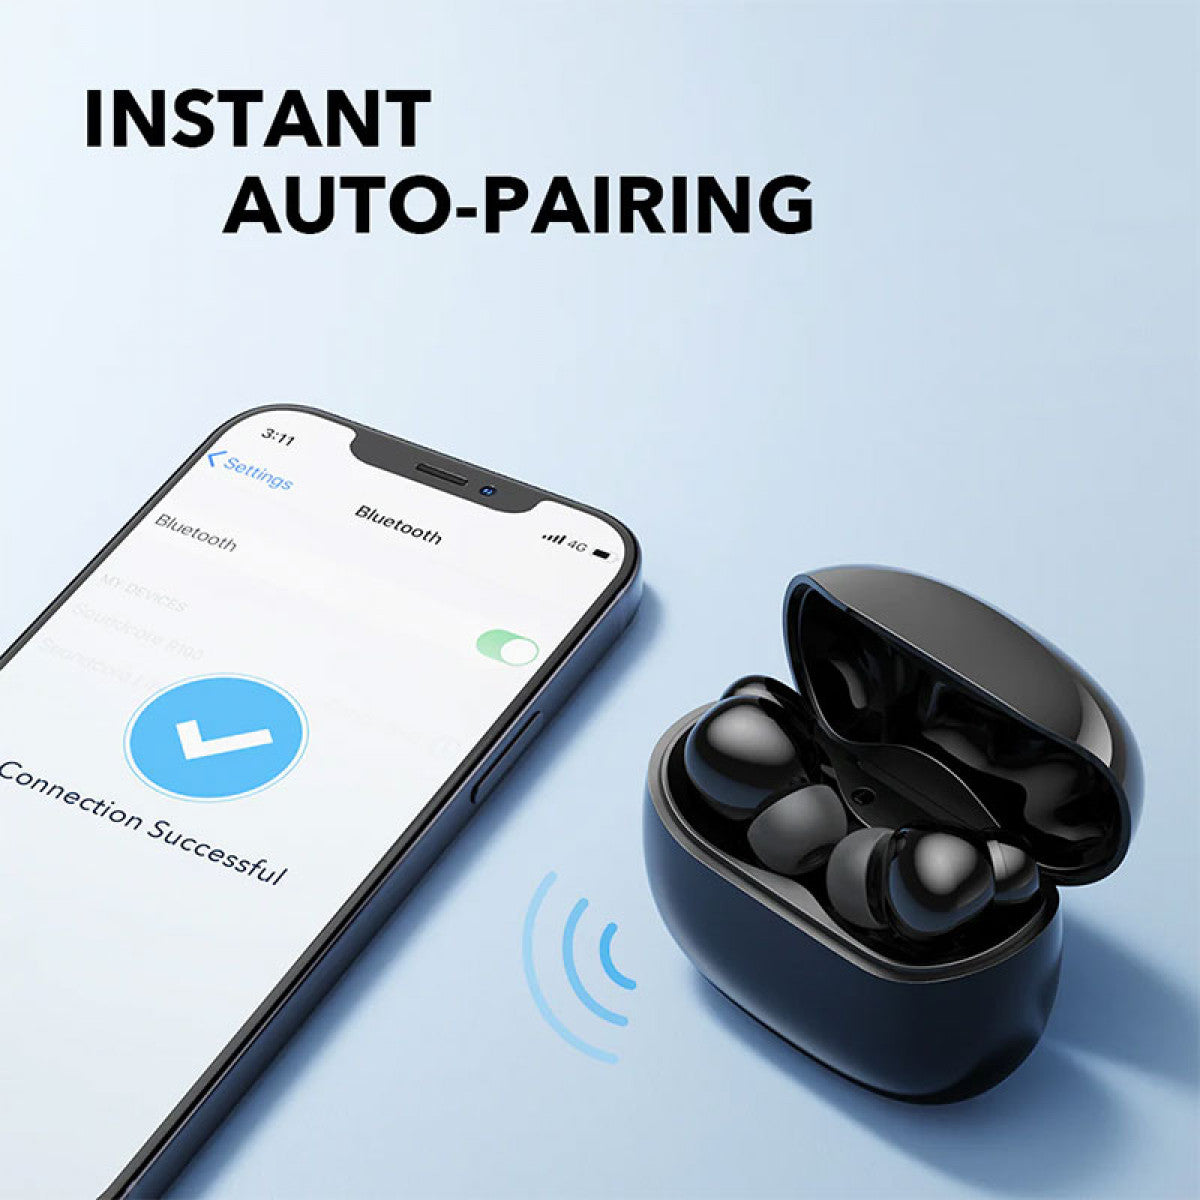 Anker Soundcore True Wireless Earbuds R100 placed next to a mobile phone